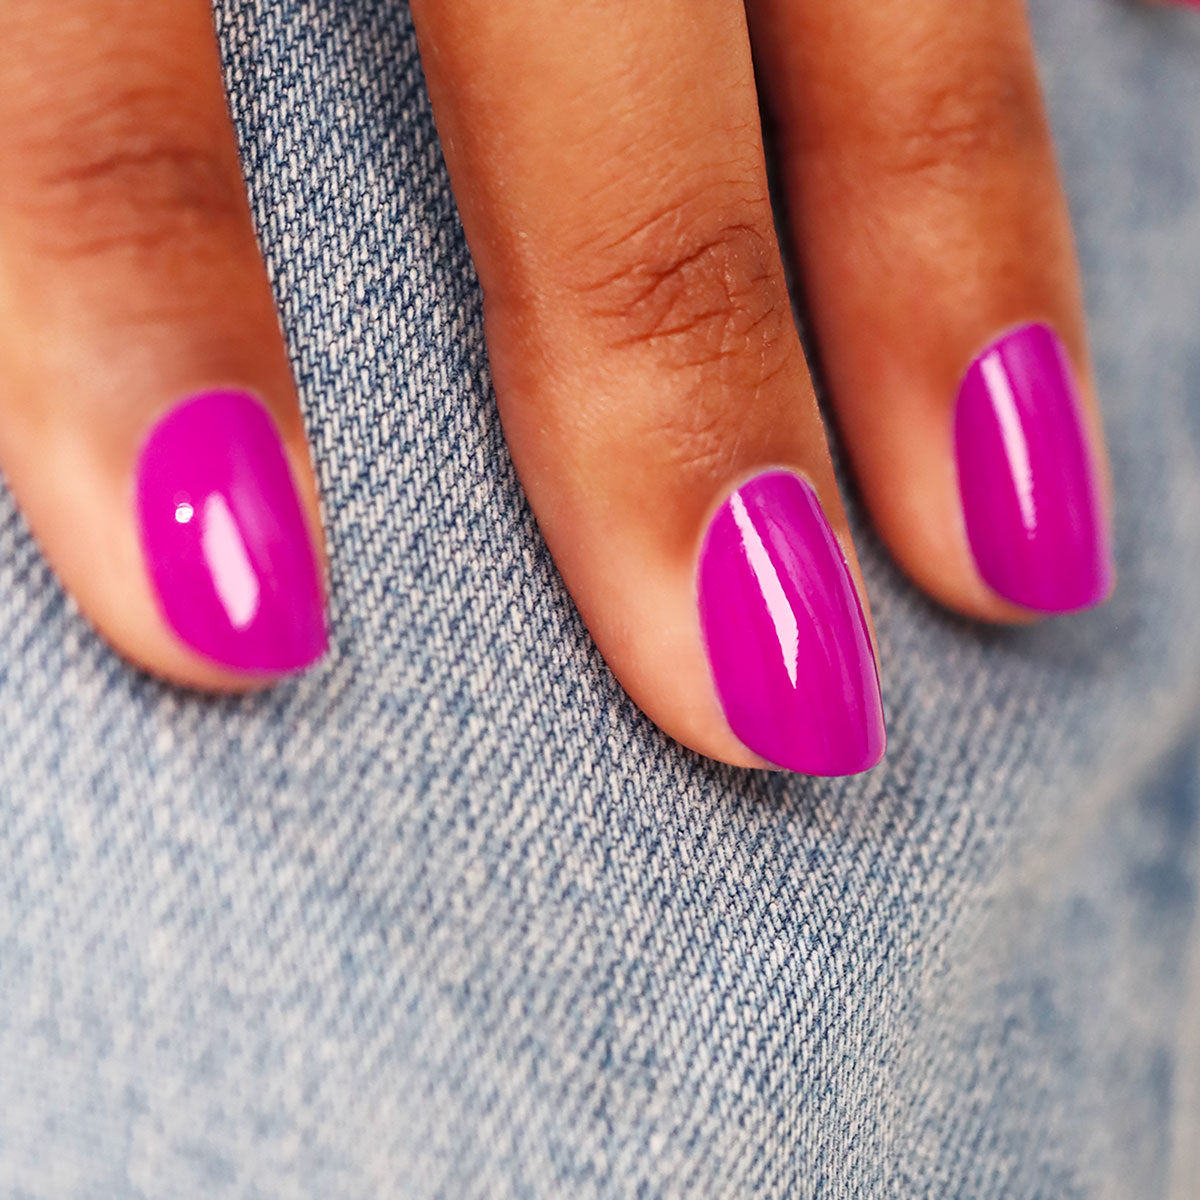 Purple Nails Are The Cool Summer 'It' Shade For Your Next Manicure